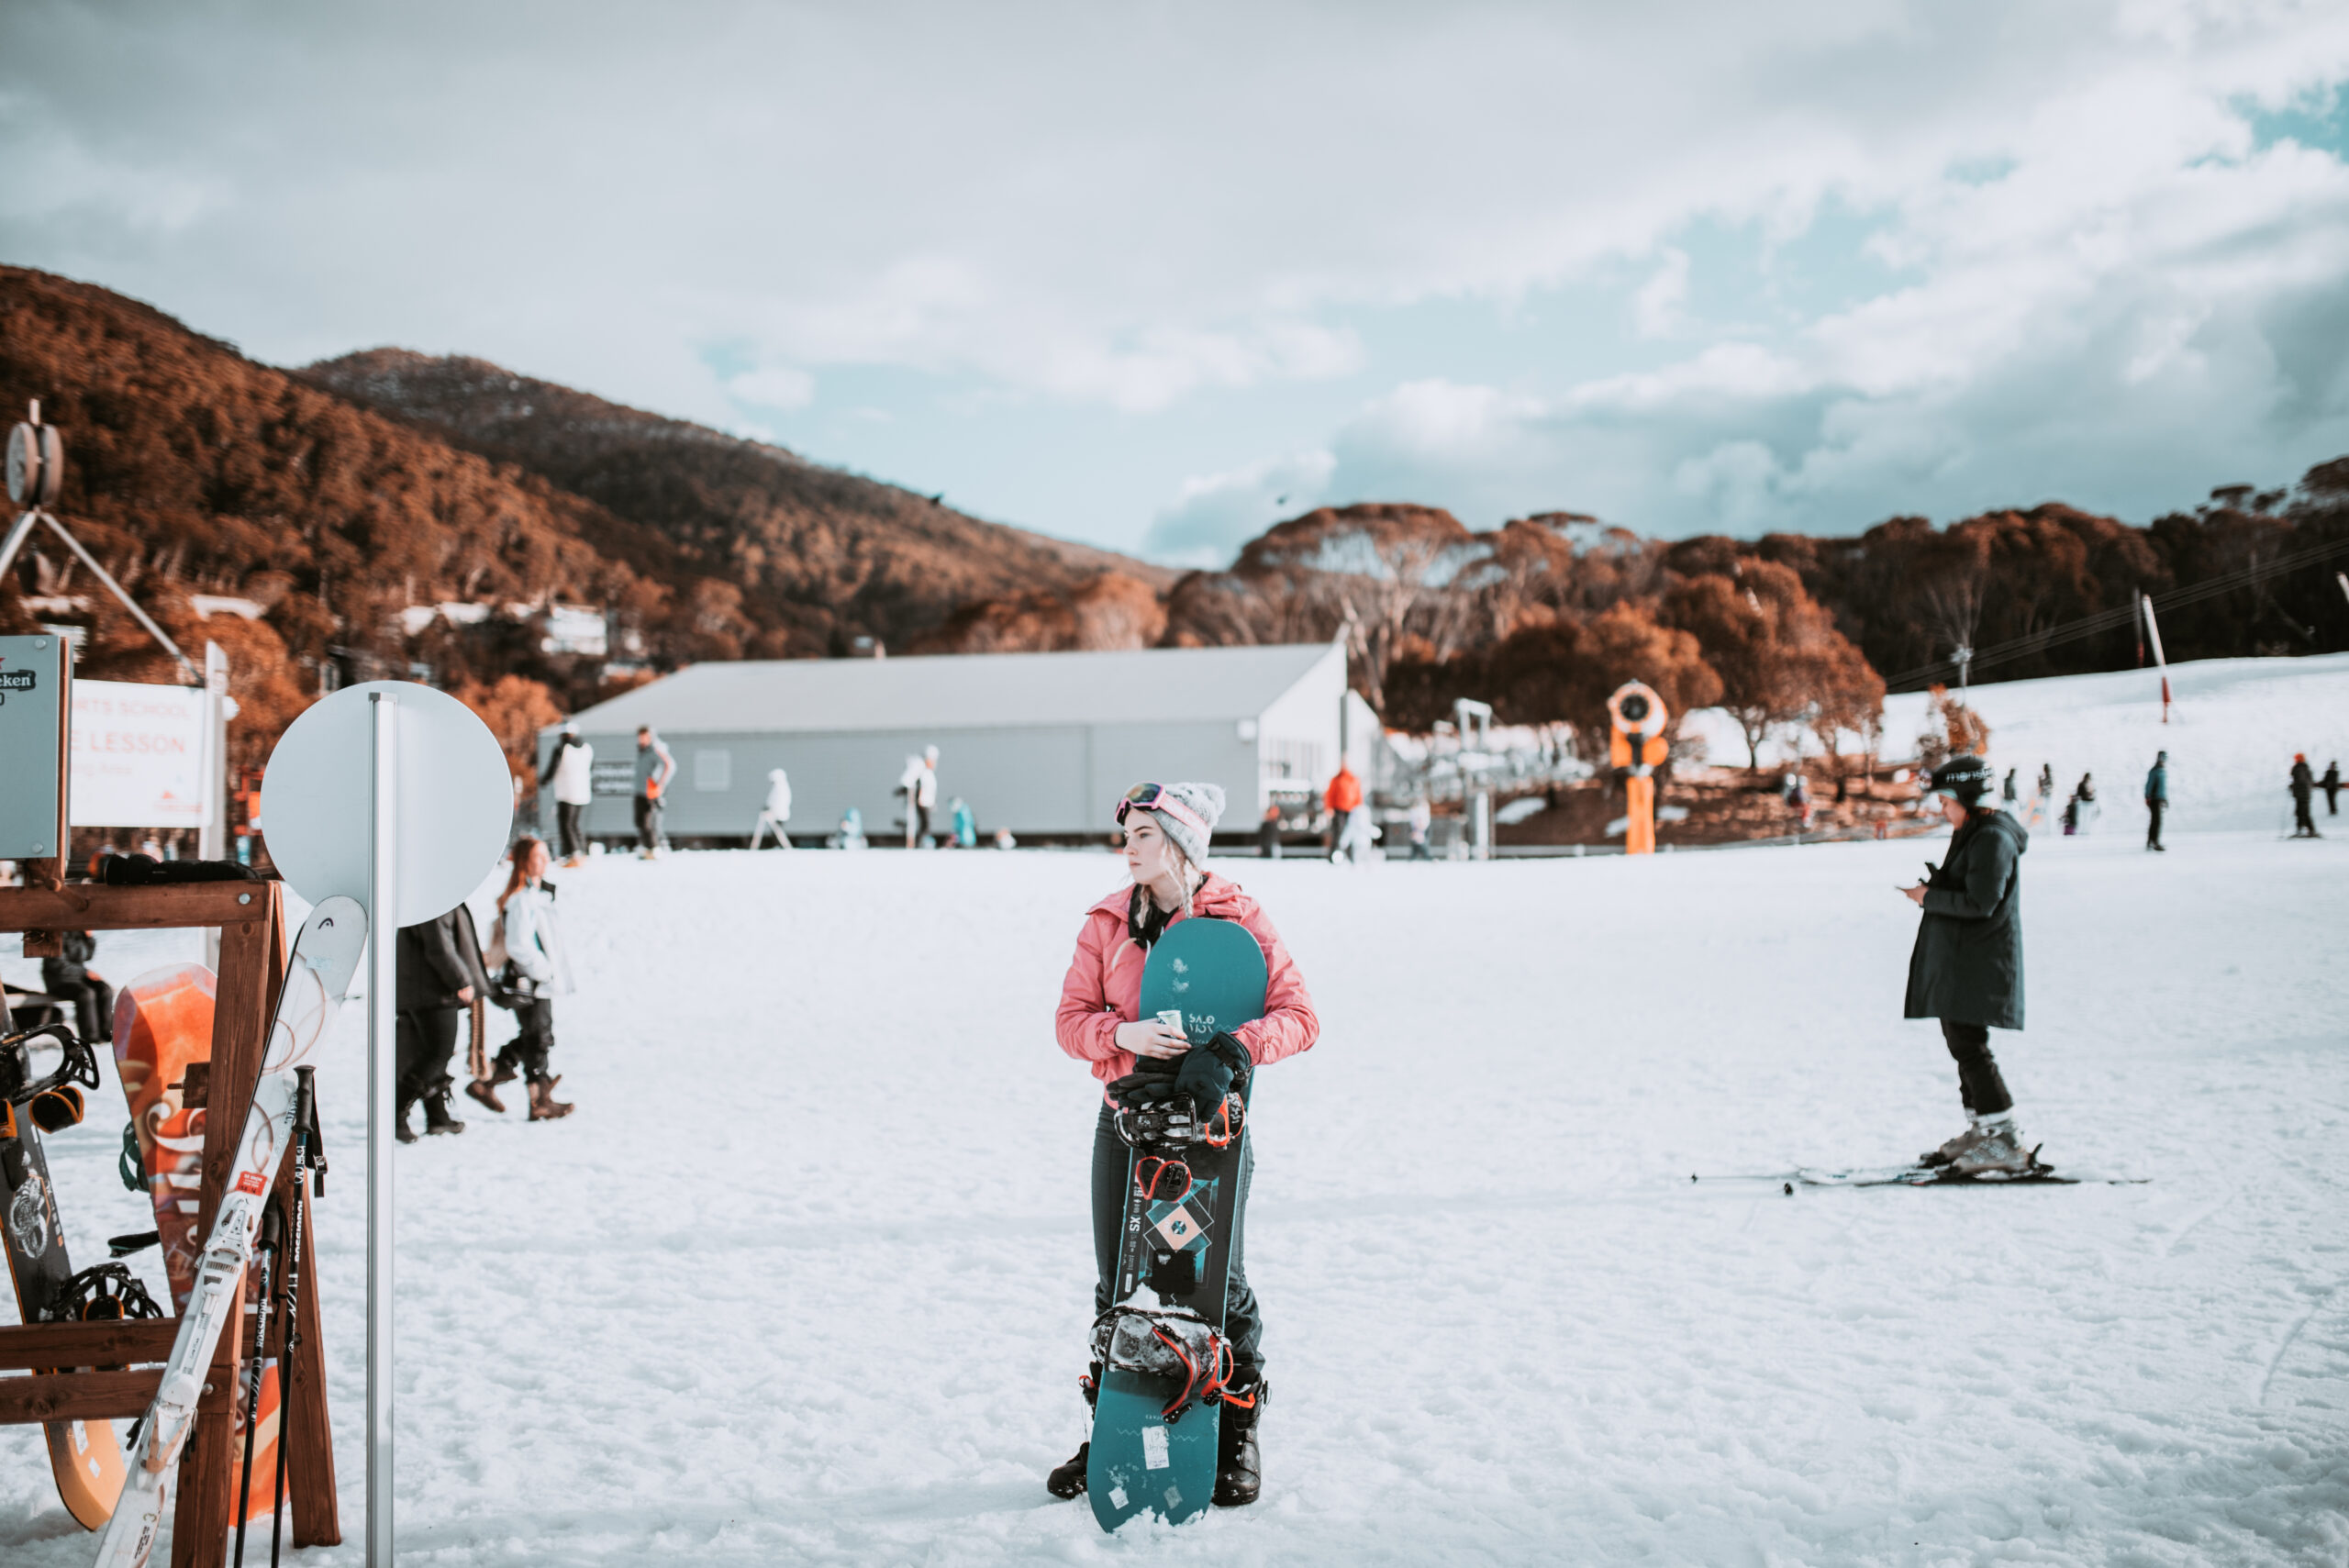 Does it Snow in Australia? - Insider Guides